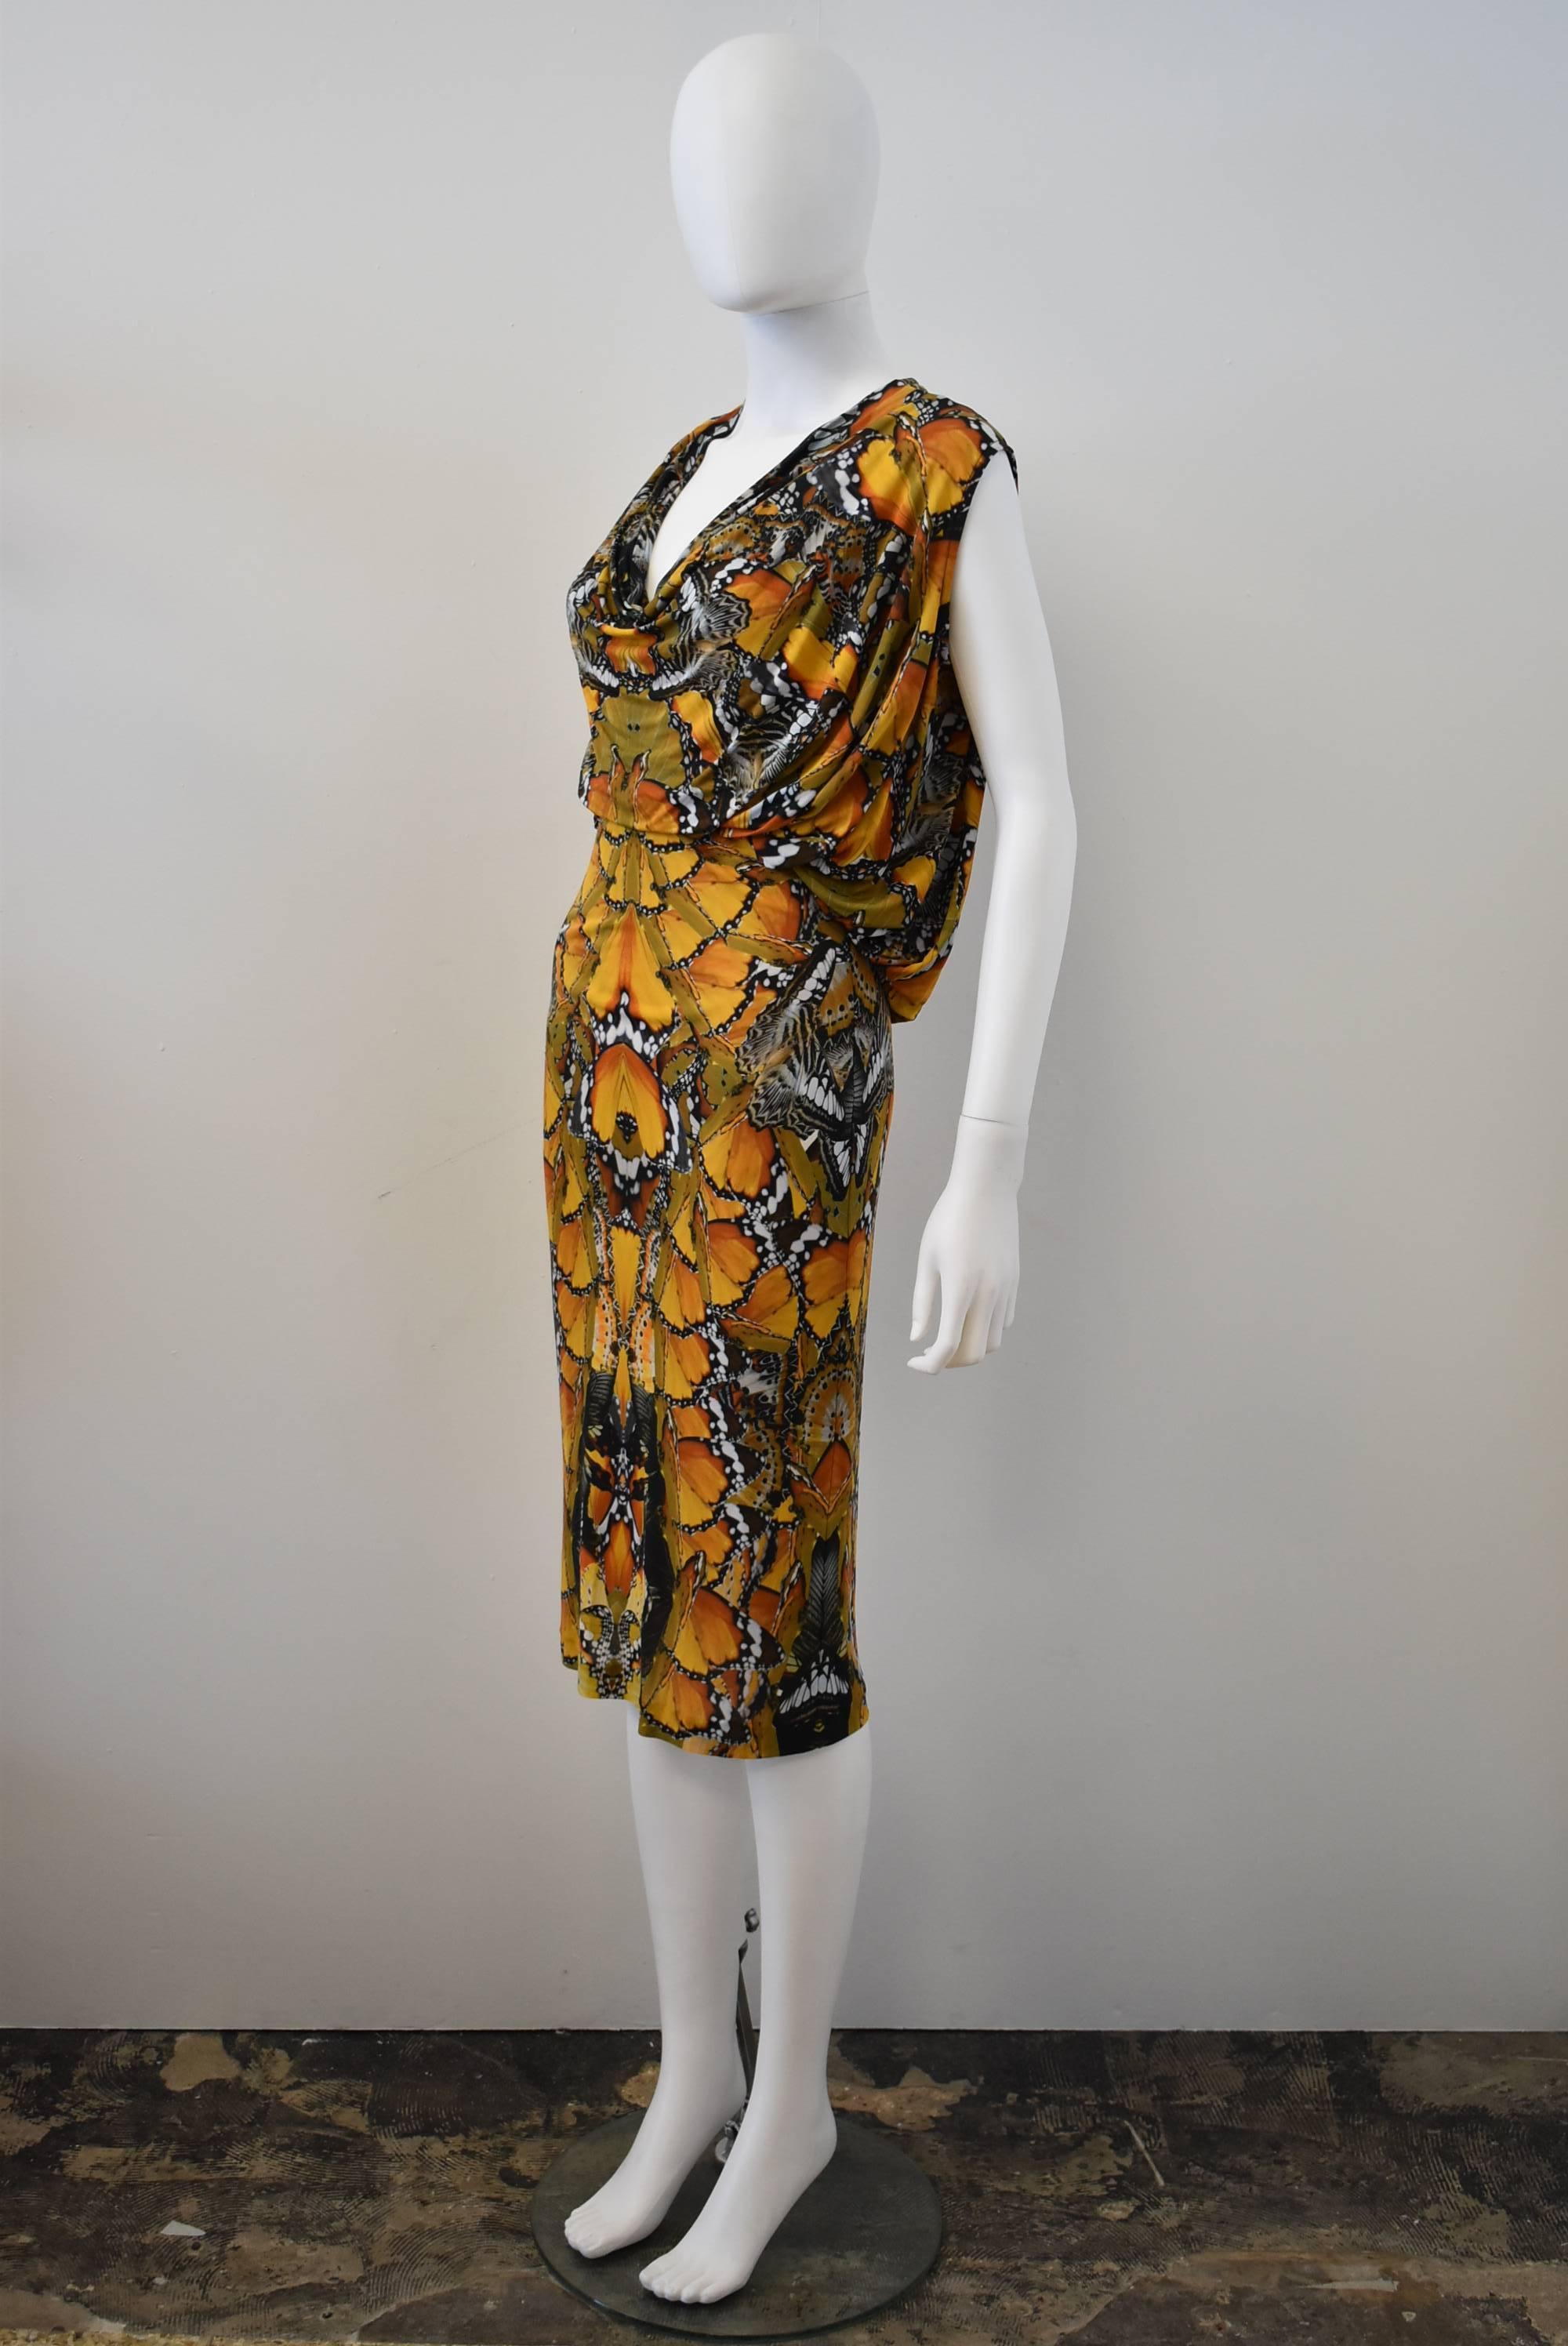 An elegant and beautiful yellow and black abstracted butterfly digital print dress from Alexander McQueen. The dress is made from a stretch viscose material that clings to the body creating an elegant silhouette. The dress has cowl-like drapery at